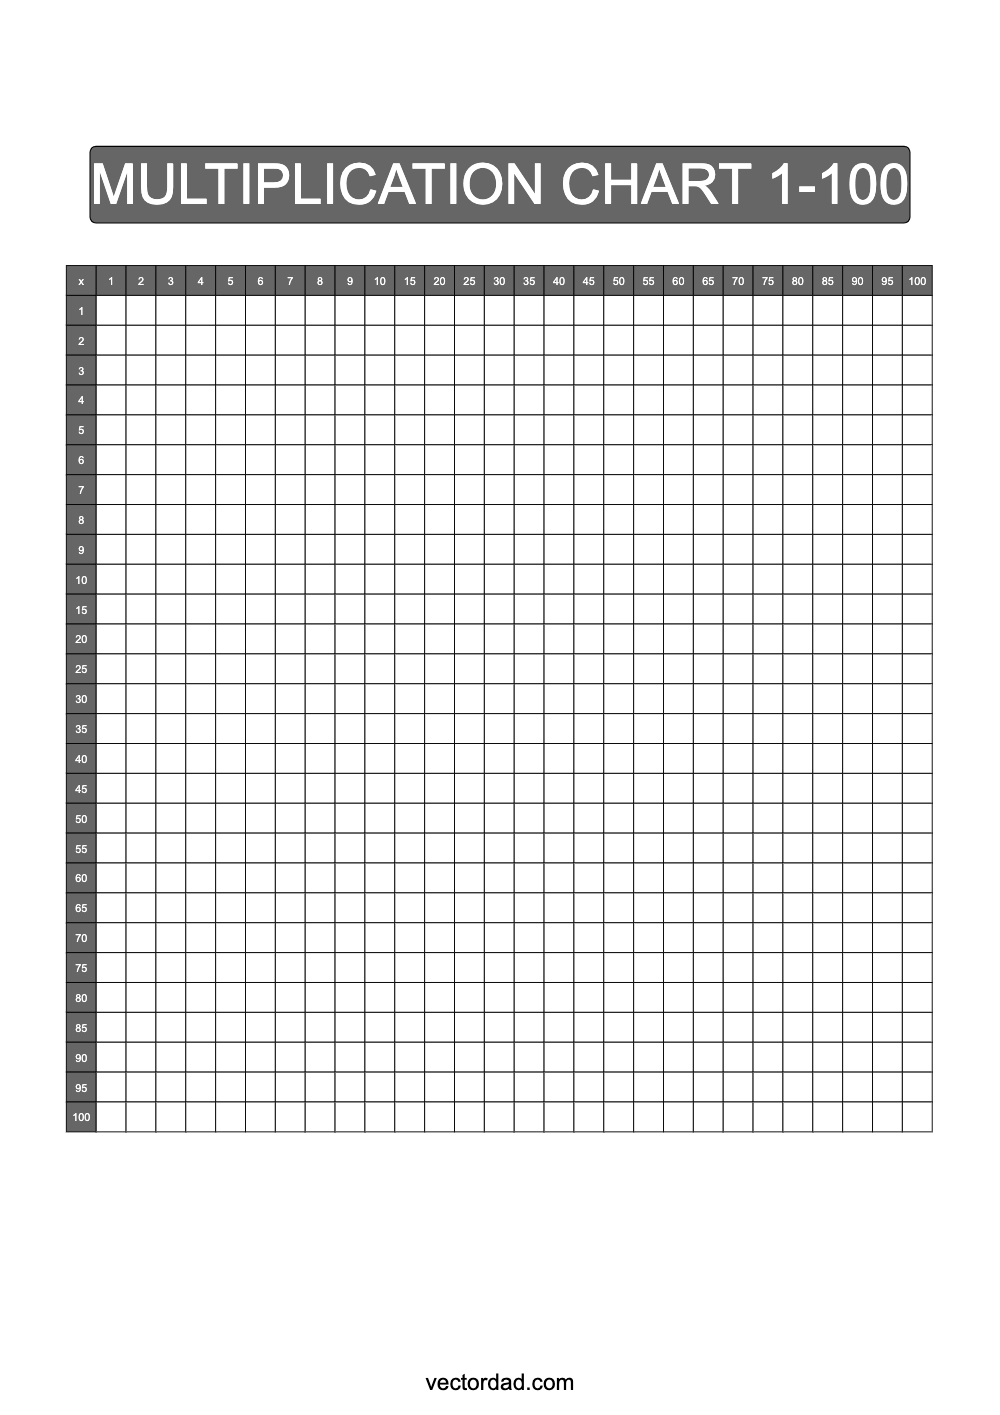 Blank Grey Multiplication Chart Printable 1 to 100 portrait Free, high quality, times table, sheet, pdf, svg, png, jpeg, svg, png, jpeg, blank, empty, 3rd grade, 4th grade, 5th grade, template, print, download, online, vertical